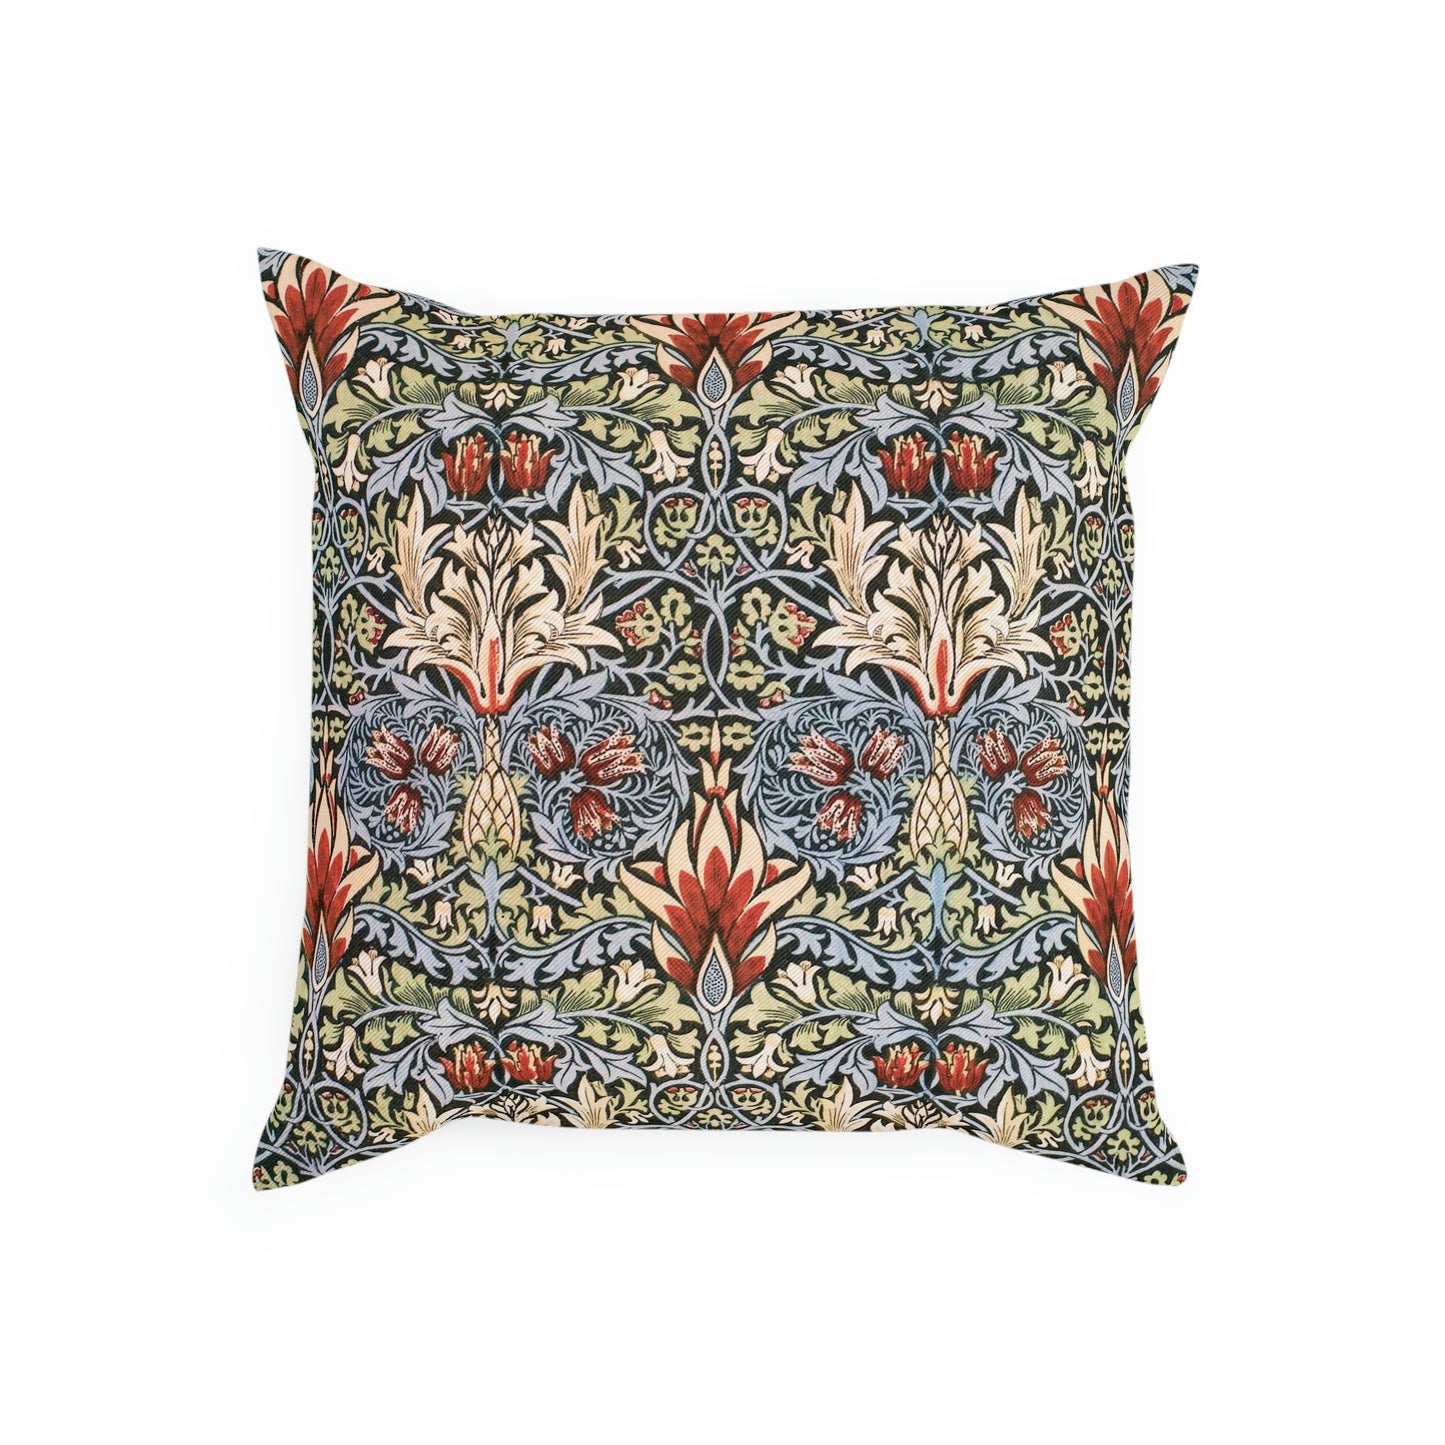 William-Morris-and-Co-Cushion-and-Cushion-Cover-Snakeshead-Collection-7